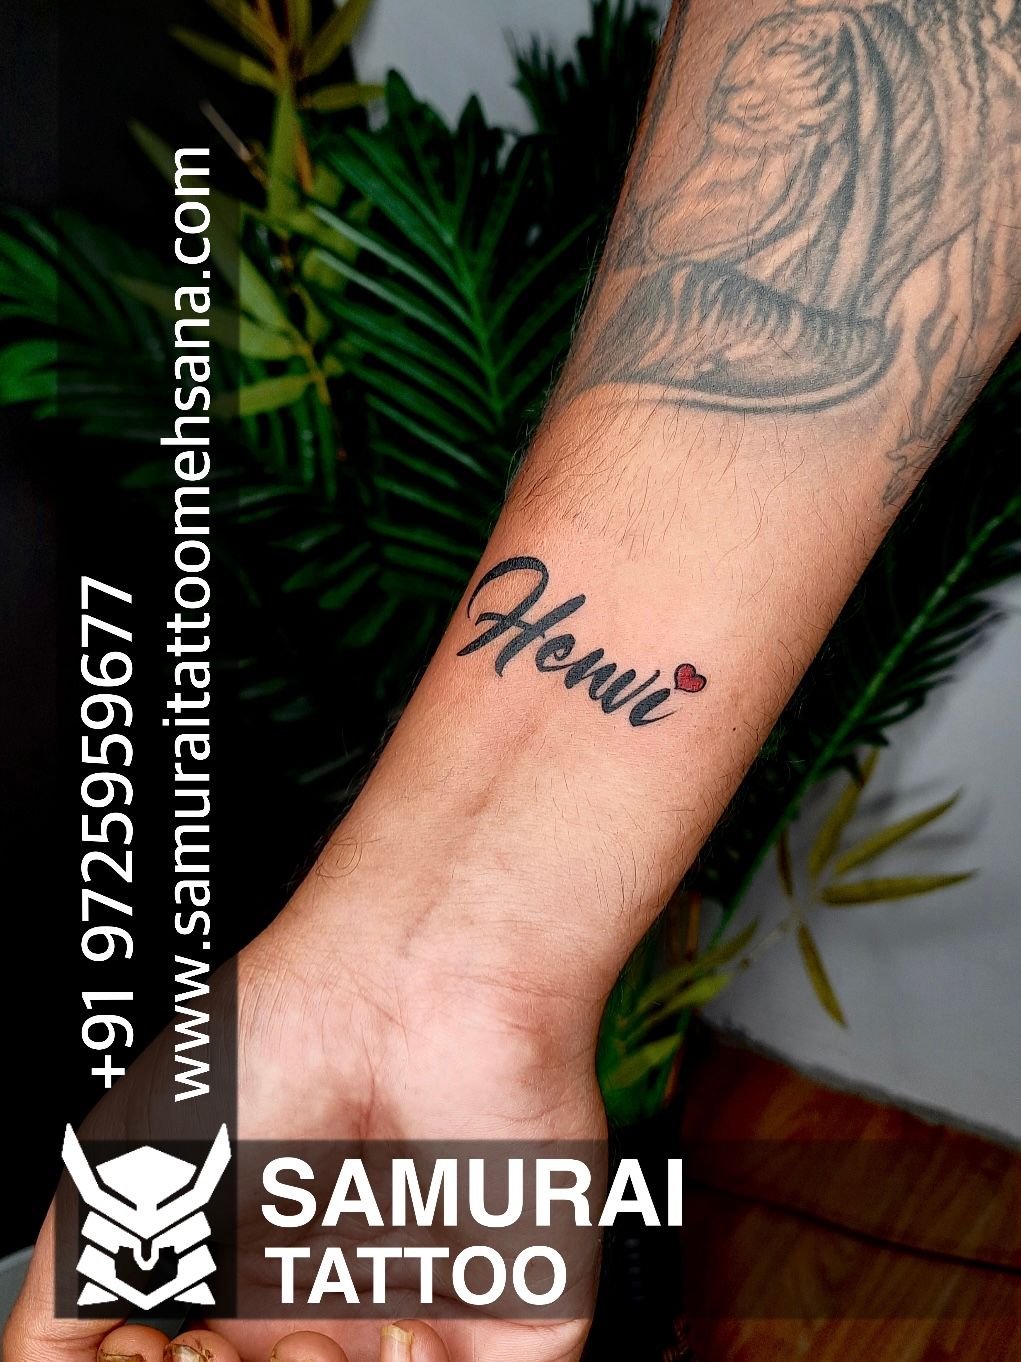 Tattoo uploaded by Vipul Chaudhary • sonal name tattoo |Sonal name tattoo  design |Sonal tattoo • Tattoodo